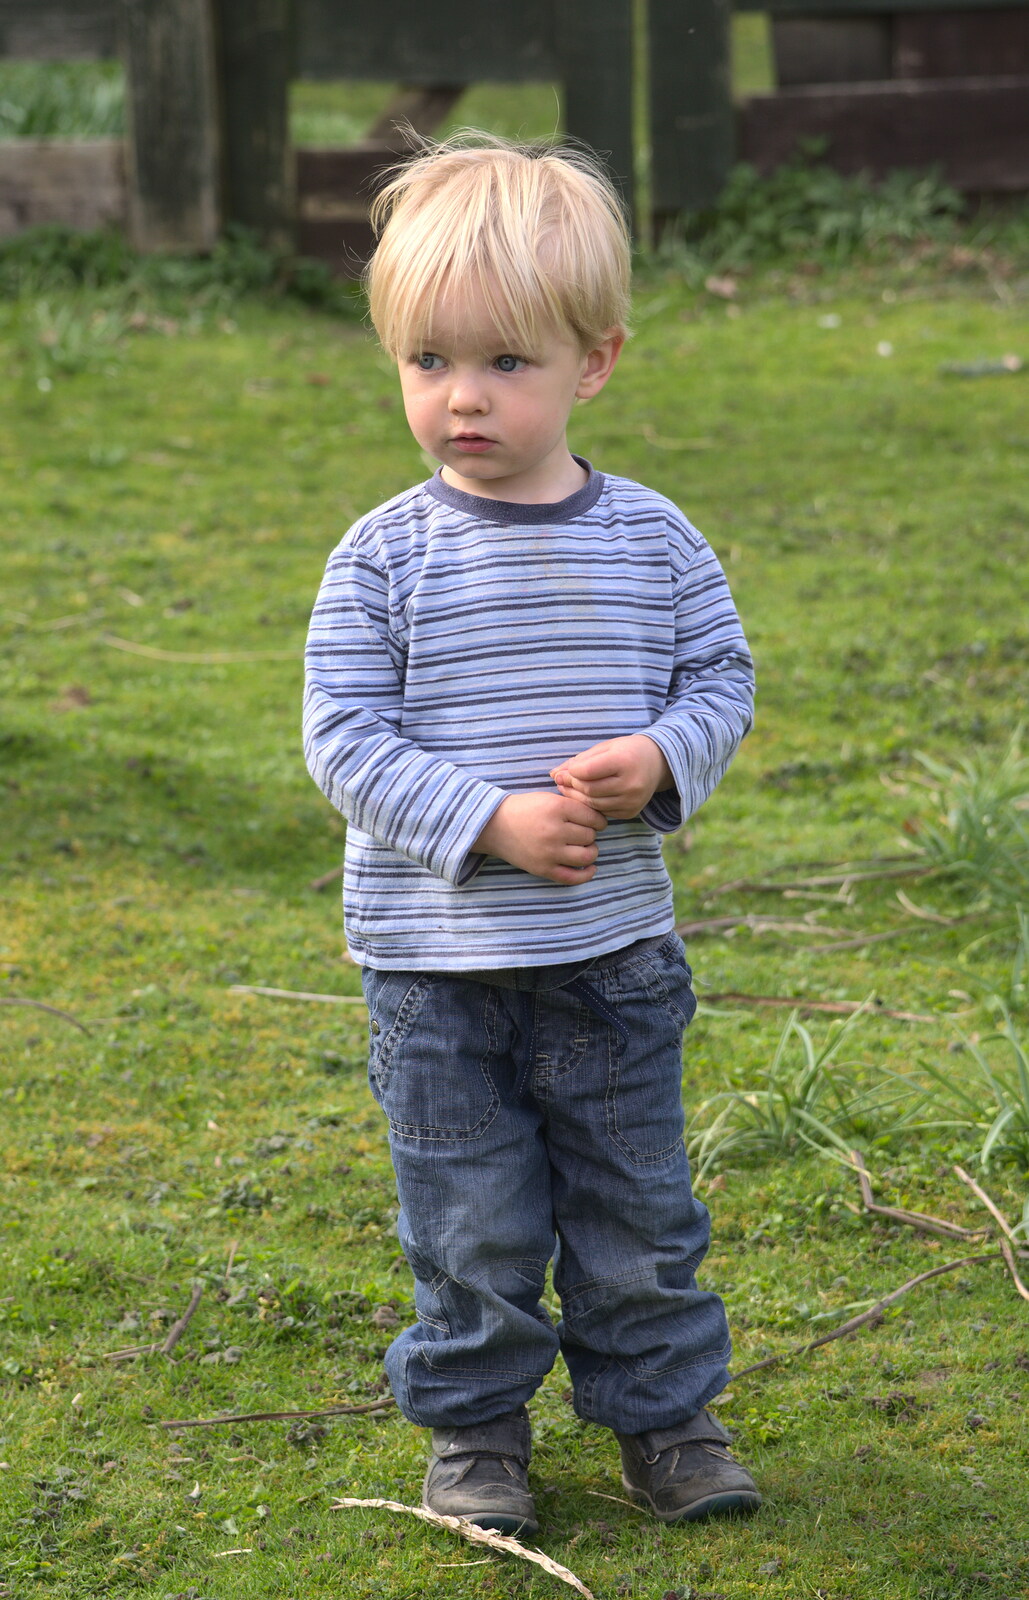 Harry roams about from On Being Two: Harry's Birthday, Brome, Suffolk - 28th March 2014